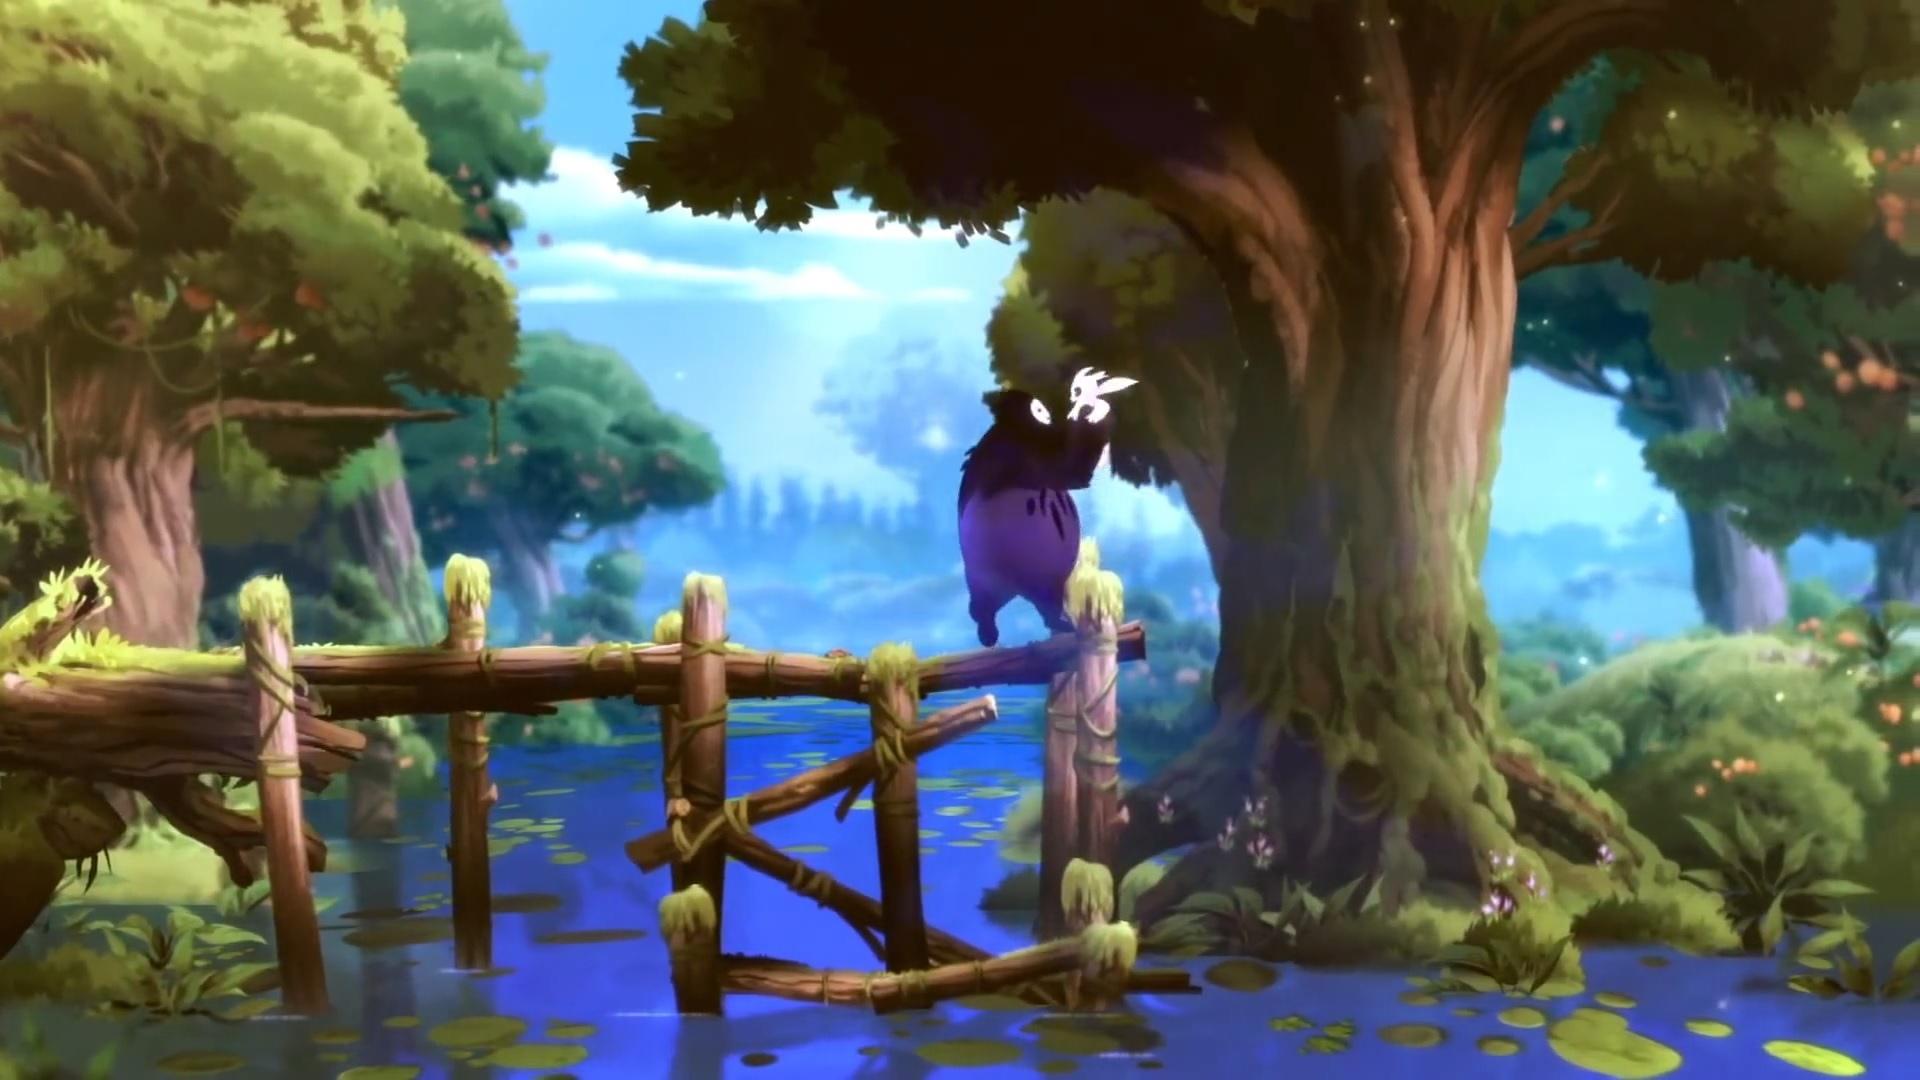 Ori And The Blind Forest Wallpaper HD